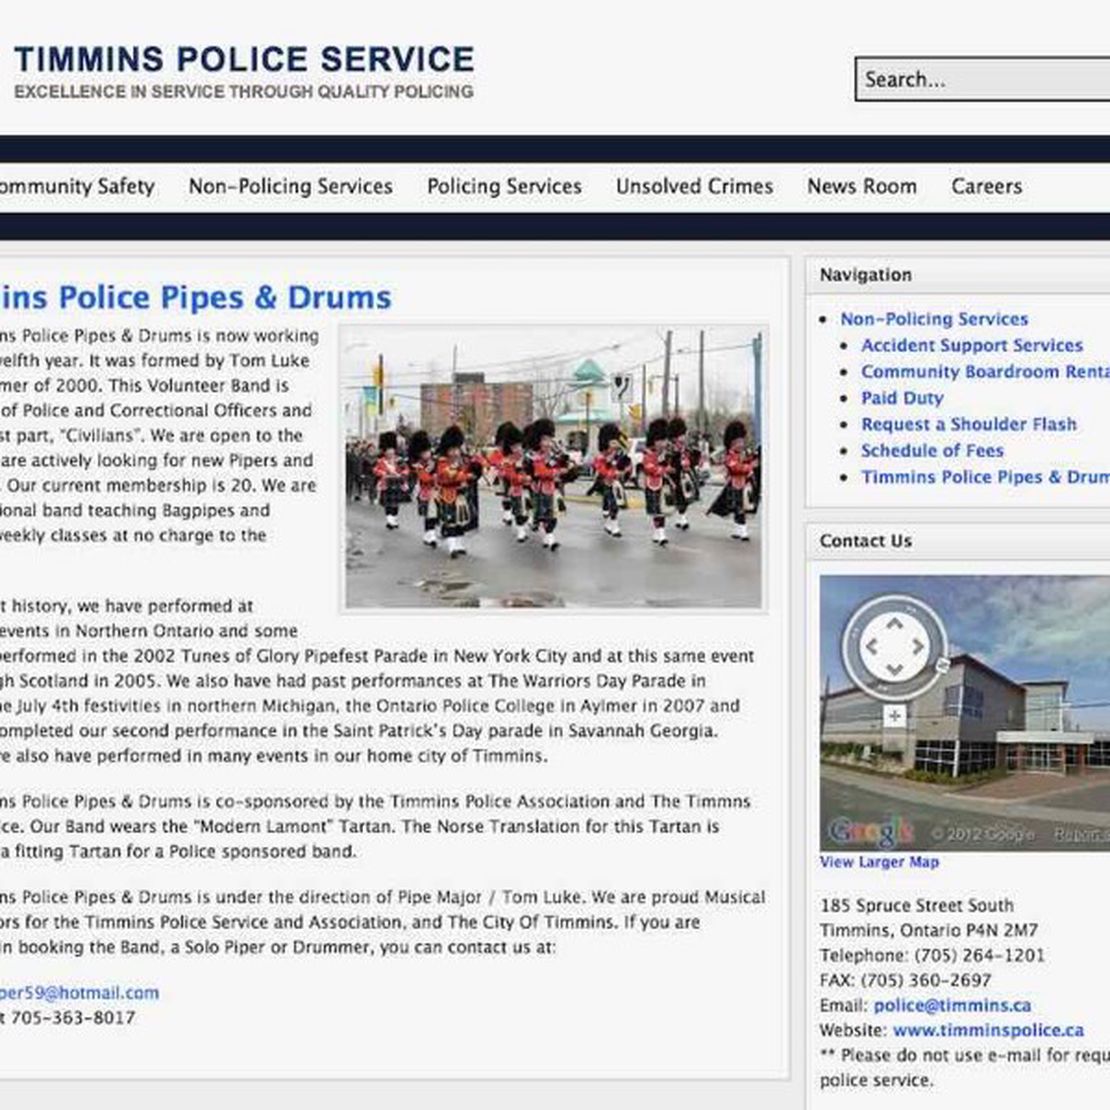 timmins police pipes and drums